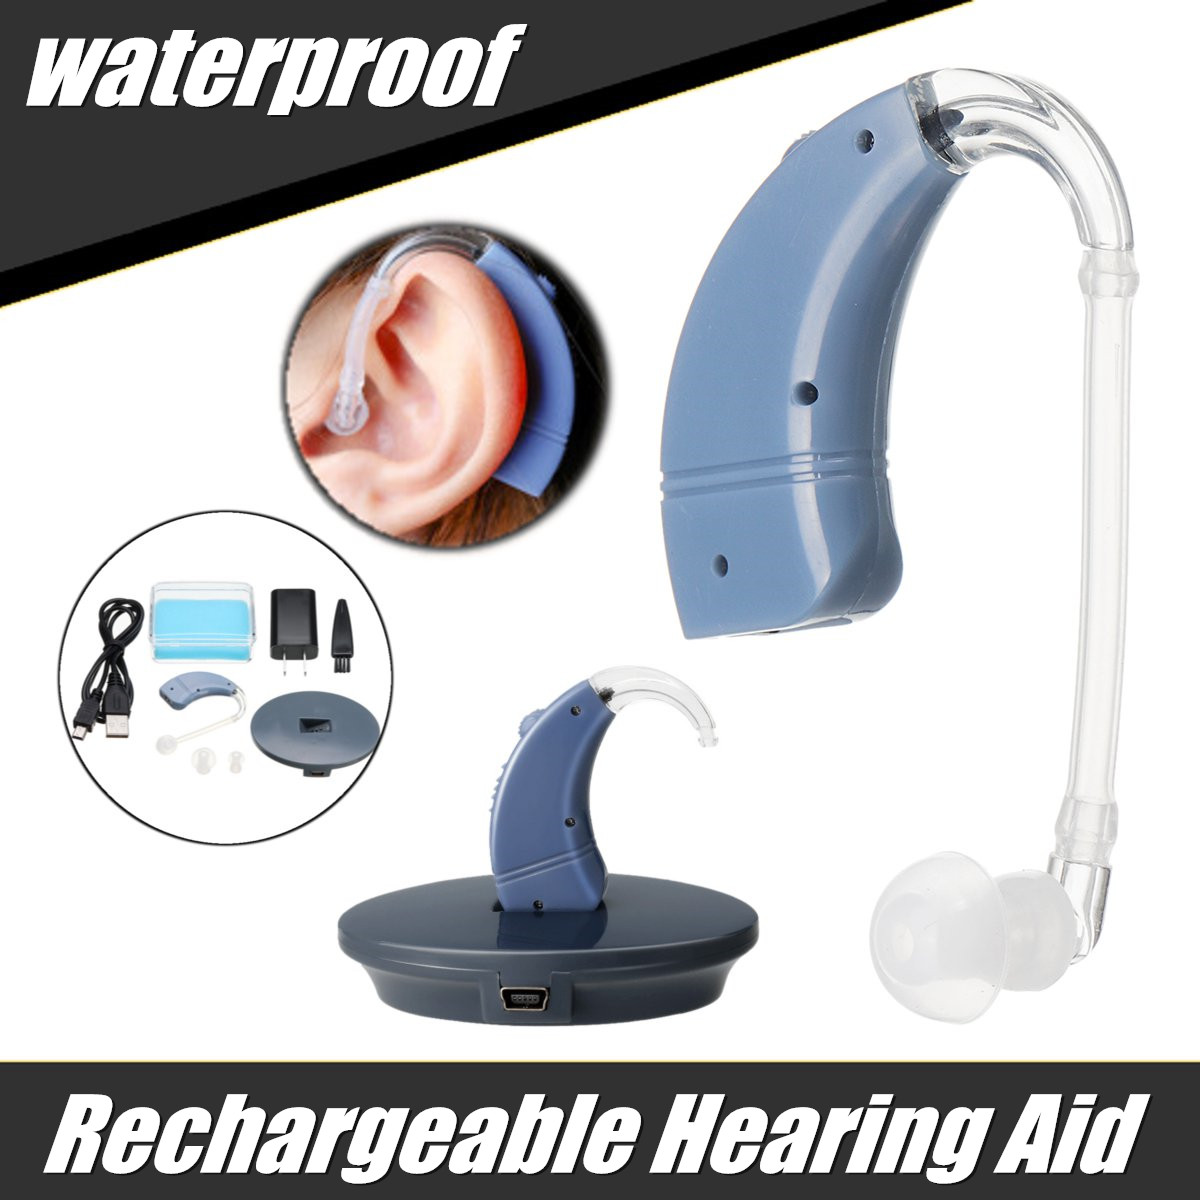 Digital-Hearing-Aid-USB-Rechargeable-Behind-Ear-Tone-Voice-Sound-Amplifier-Hearing-Aid-Kit-1404310